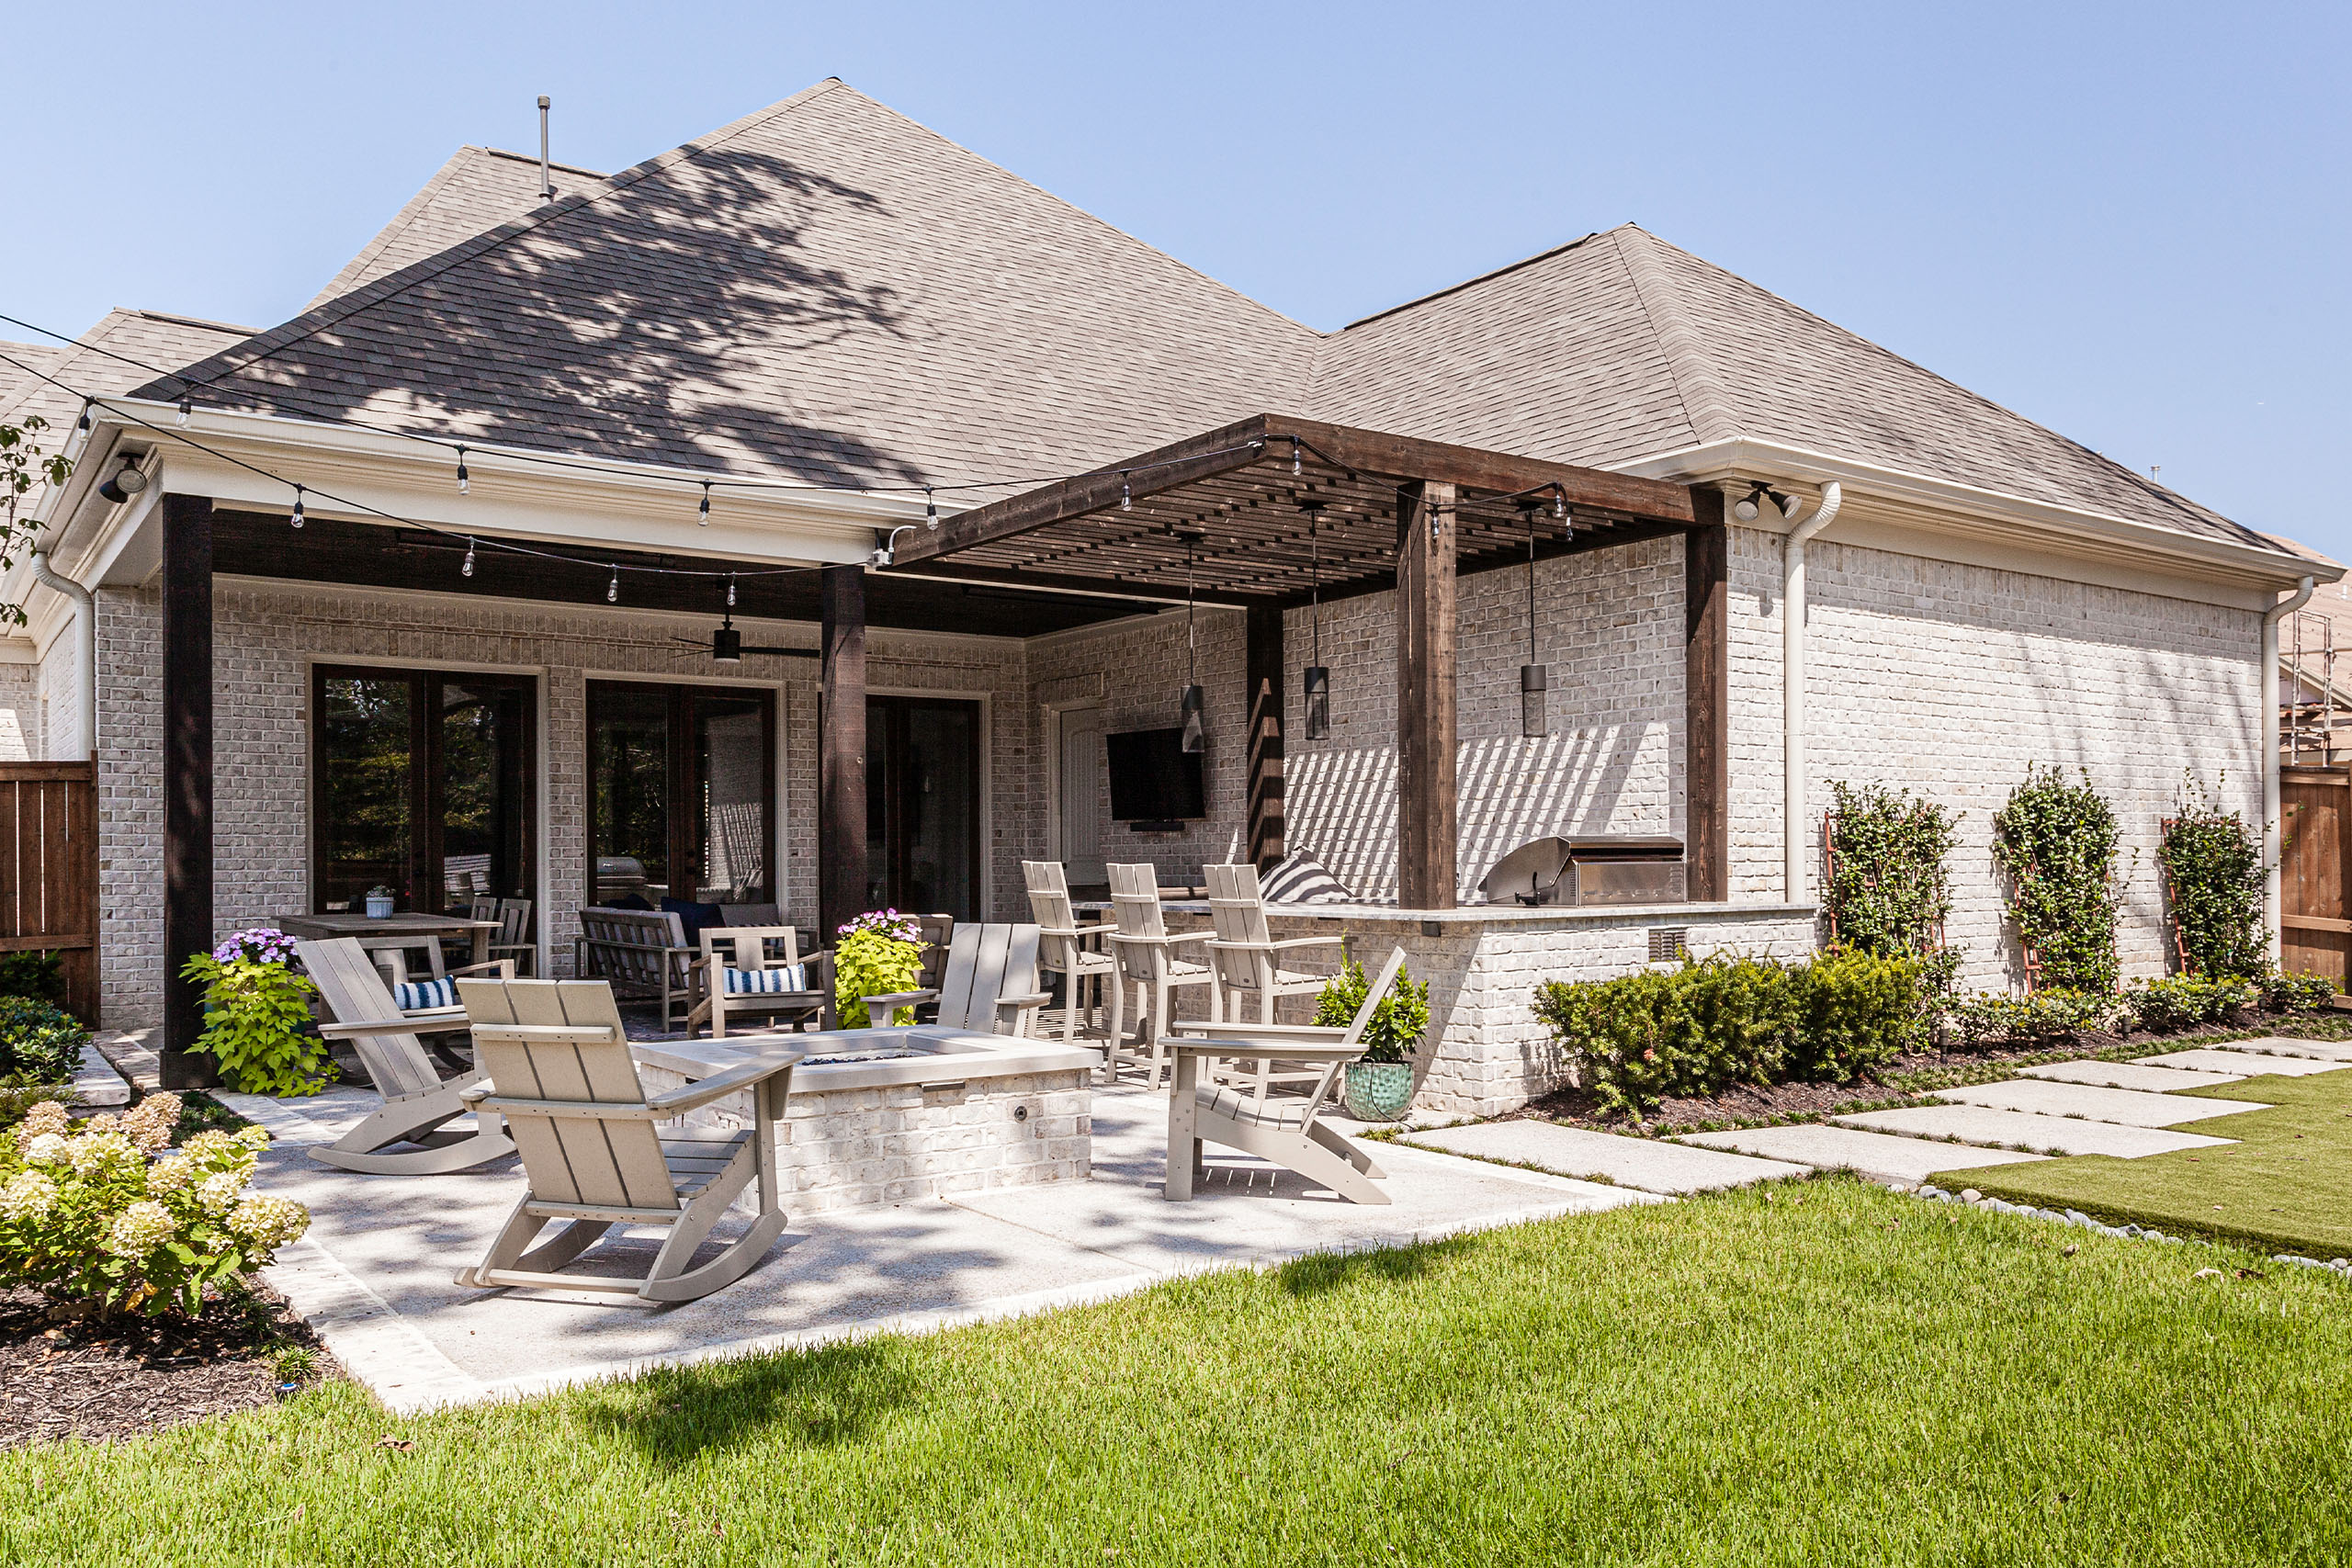 BRICK COLOR: GRAND BAY | MORTAR COLOR: FEDERAL WHITE TYPE N
BUILDER: CELTIC MANOR HOMES, MARK McGUIRE
OUTDOOR LIVING CONTRACTOR: KEVIN BALTZ
PHOTOGRAPHER: NATE RENNER